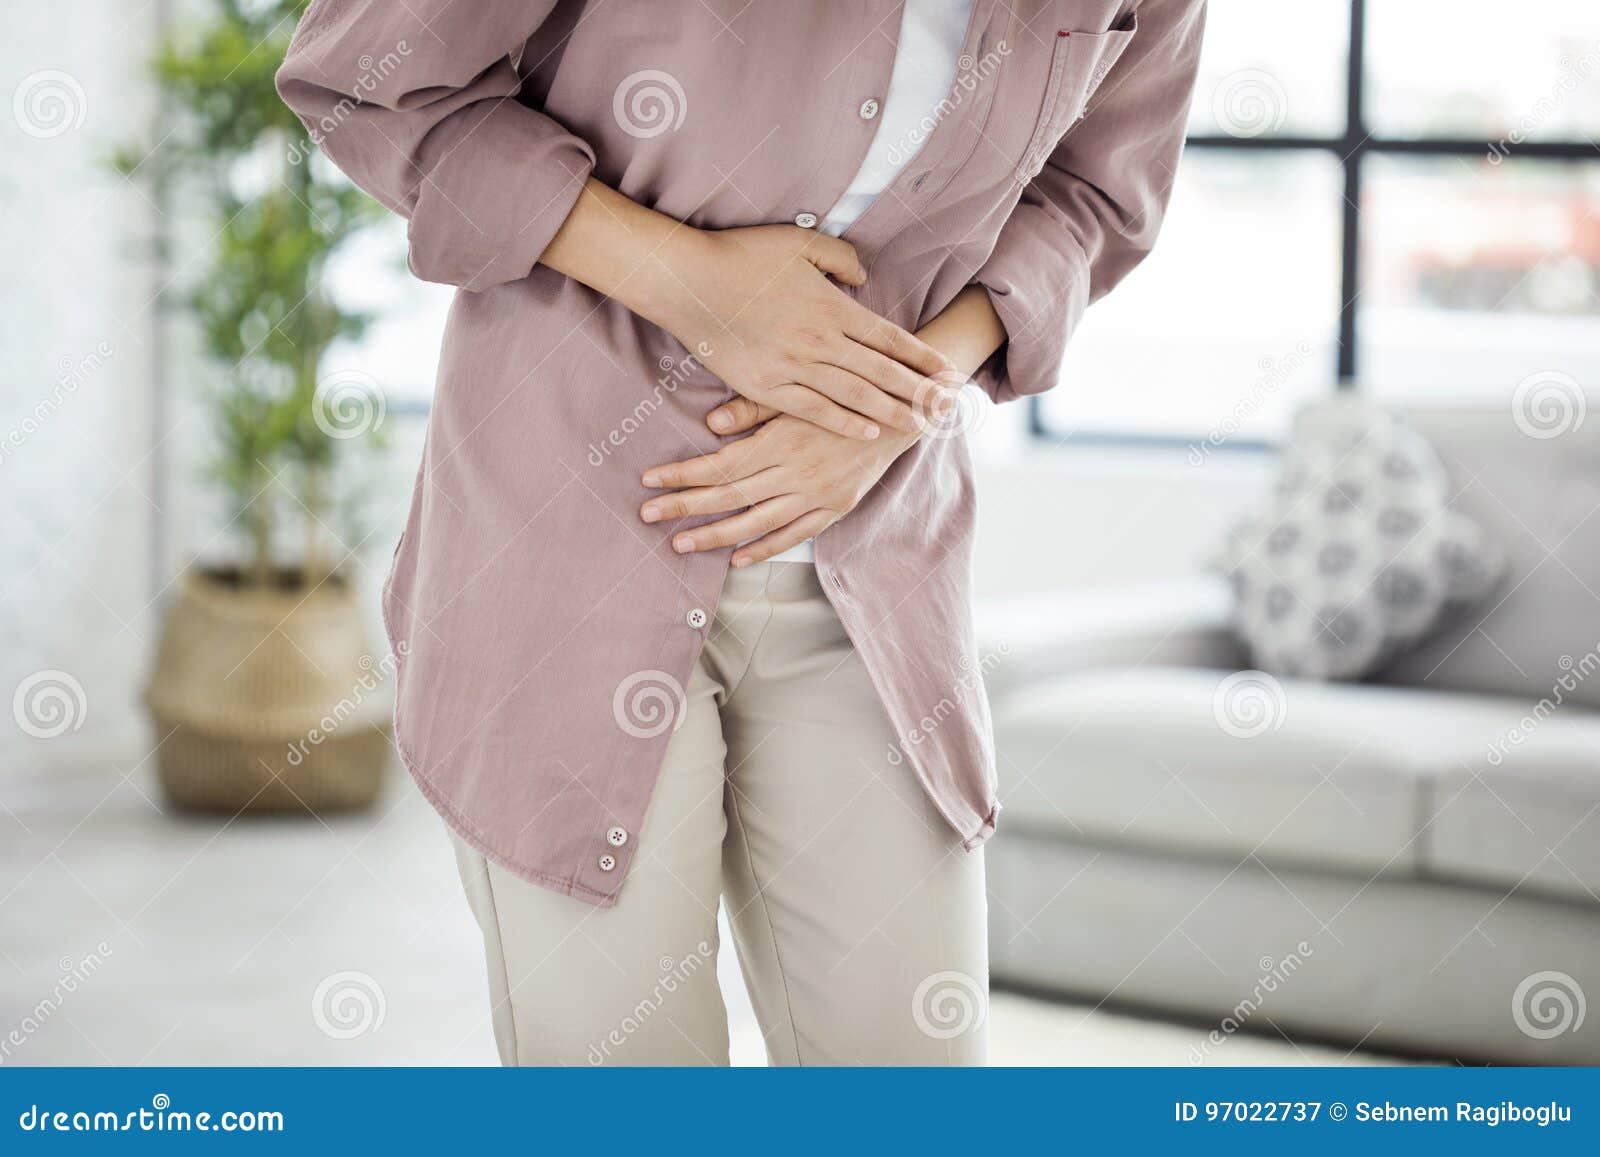 young woman with stomach pain